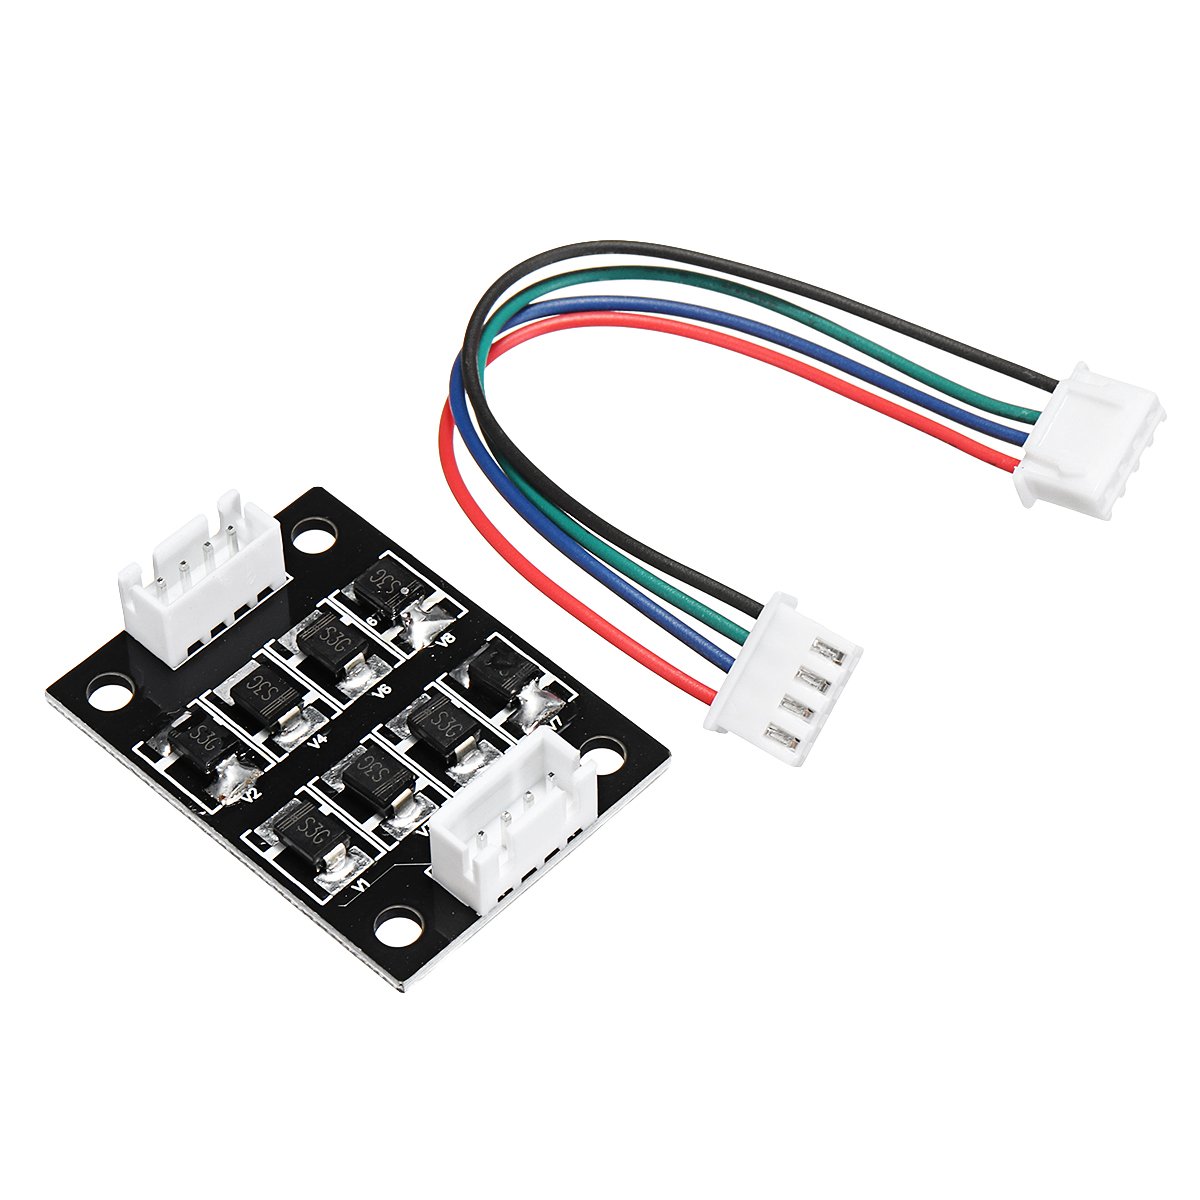 5PCS TL-Smoother Addon Module With Dupont Line For 3D Printer Stepper Motor 1